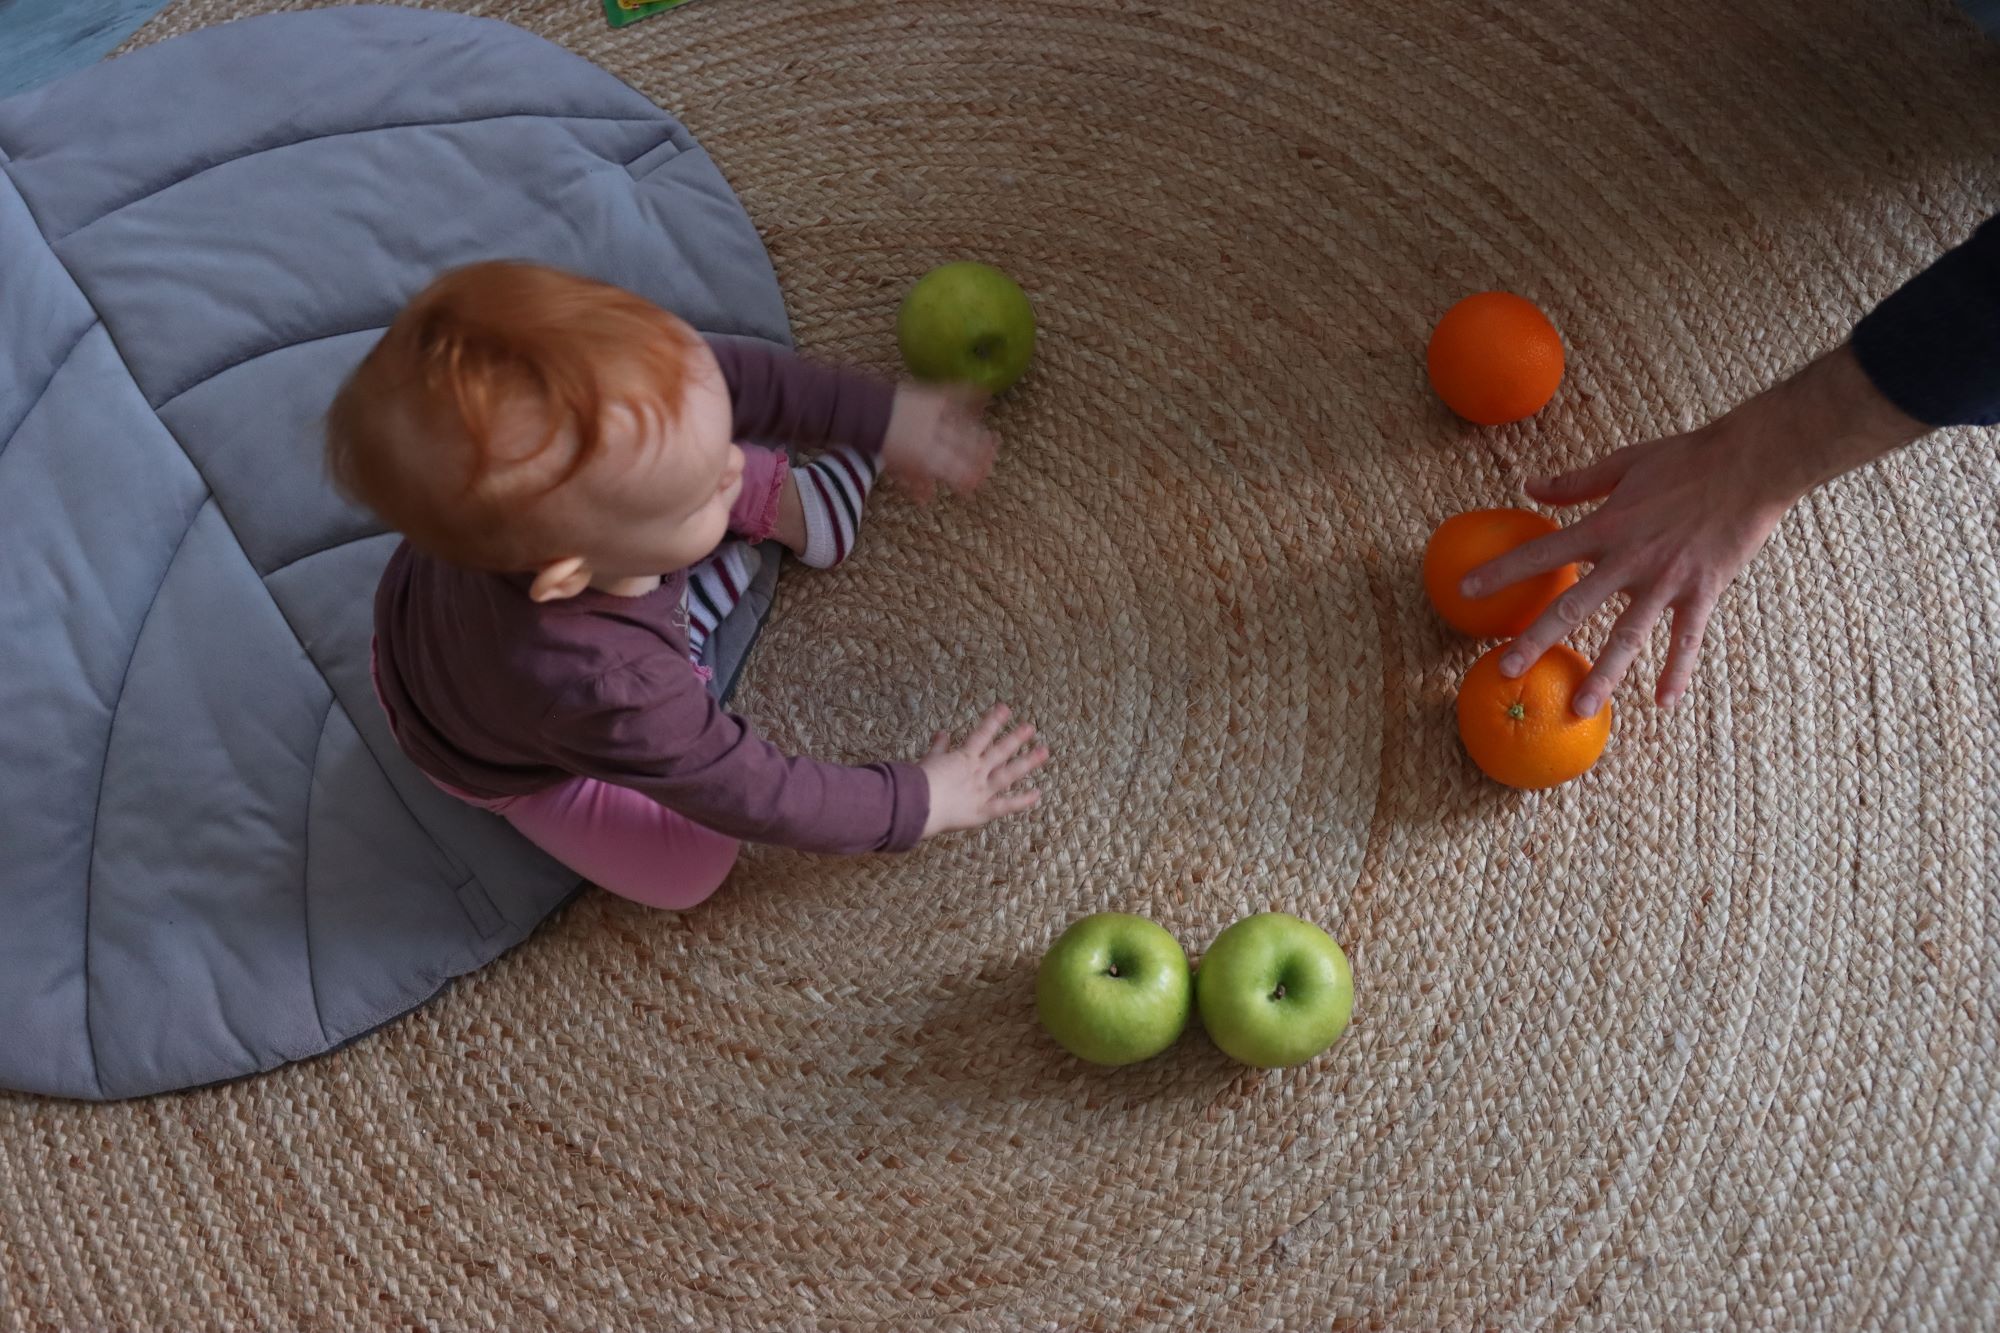 Baby learning words and numbers through play with their caregiver. Photo: Peter Lengyel-Szabo